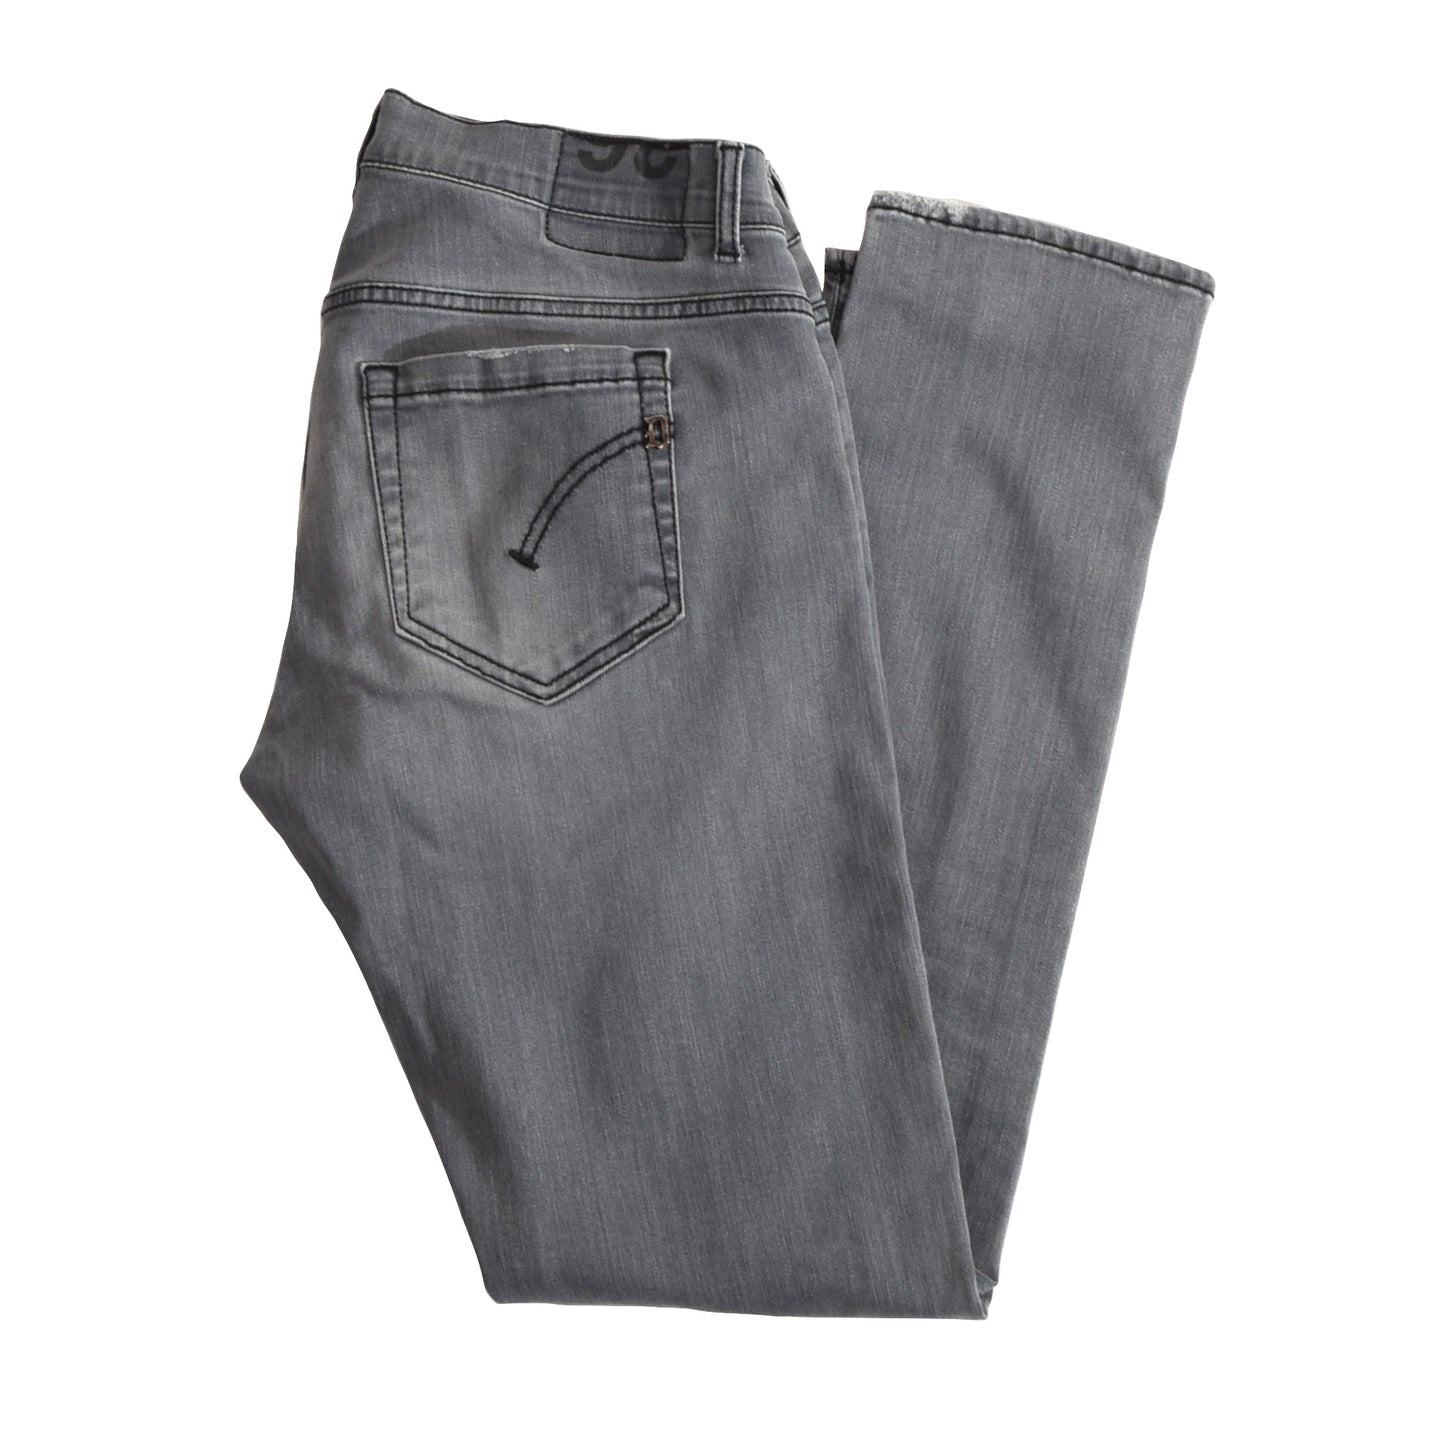 Dondup Jeans George Skinny Fit Size W36 - Grey